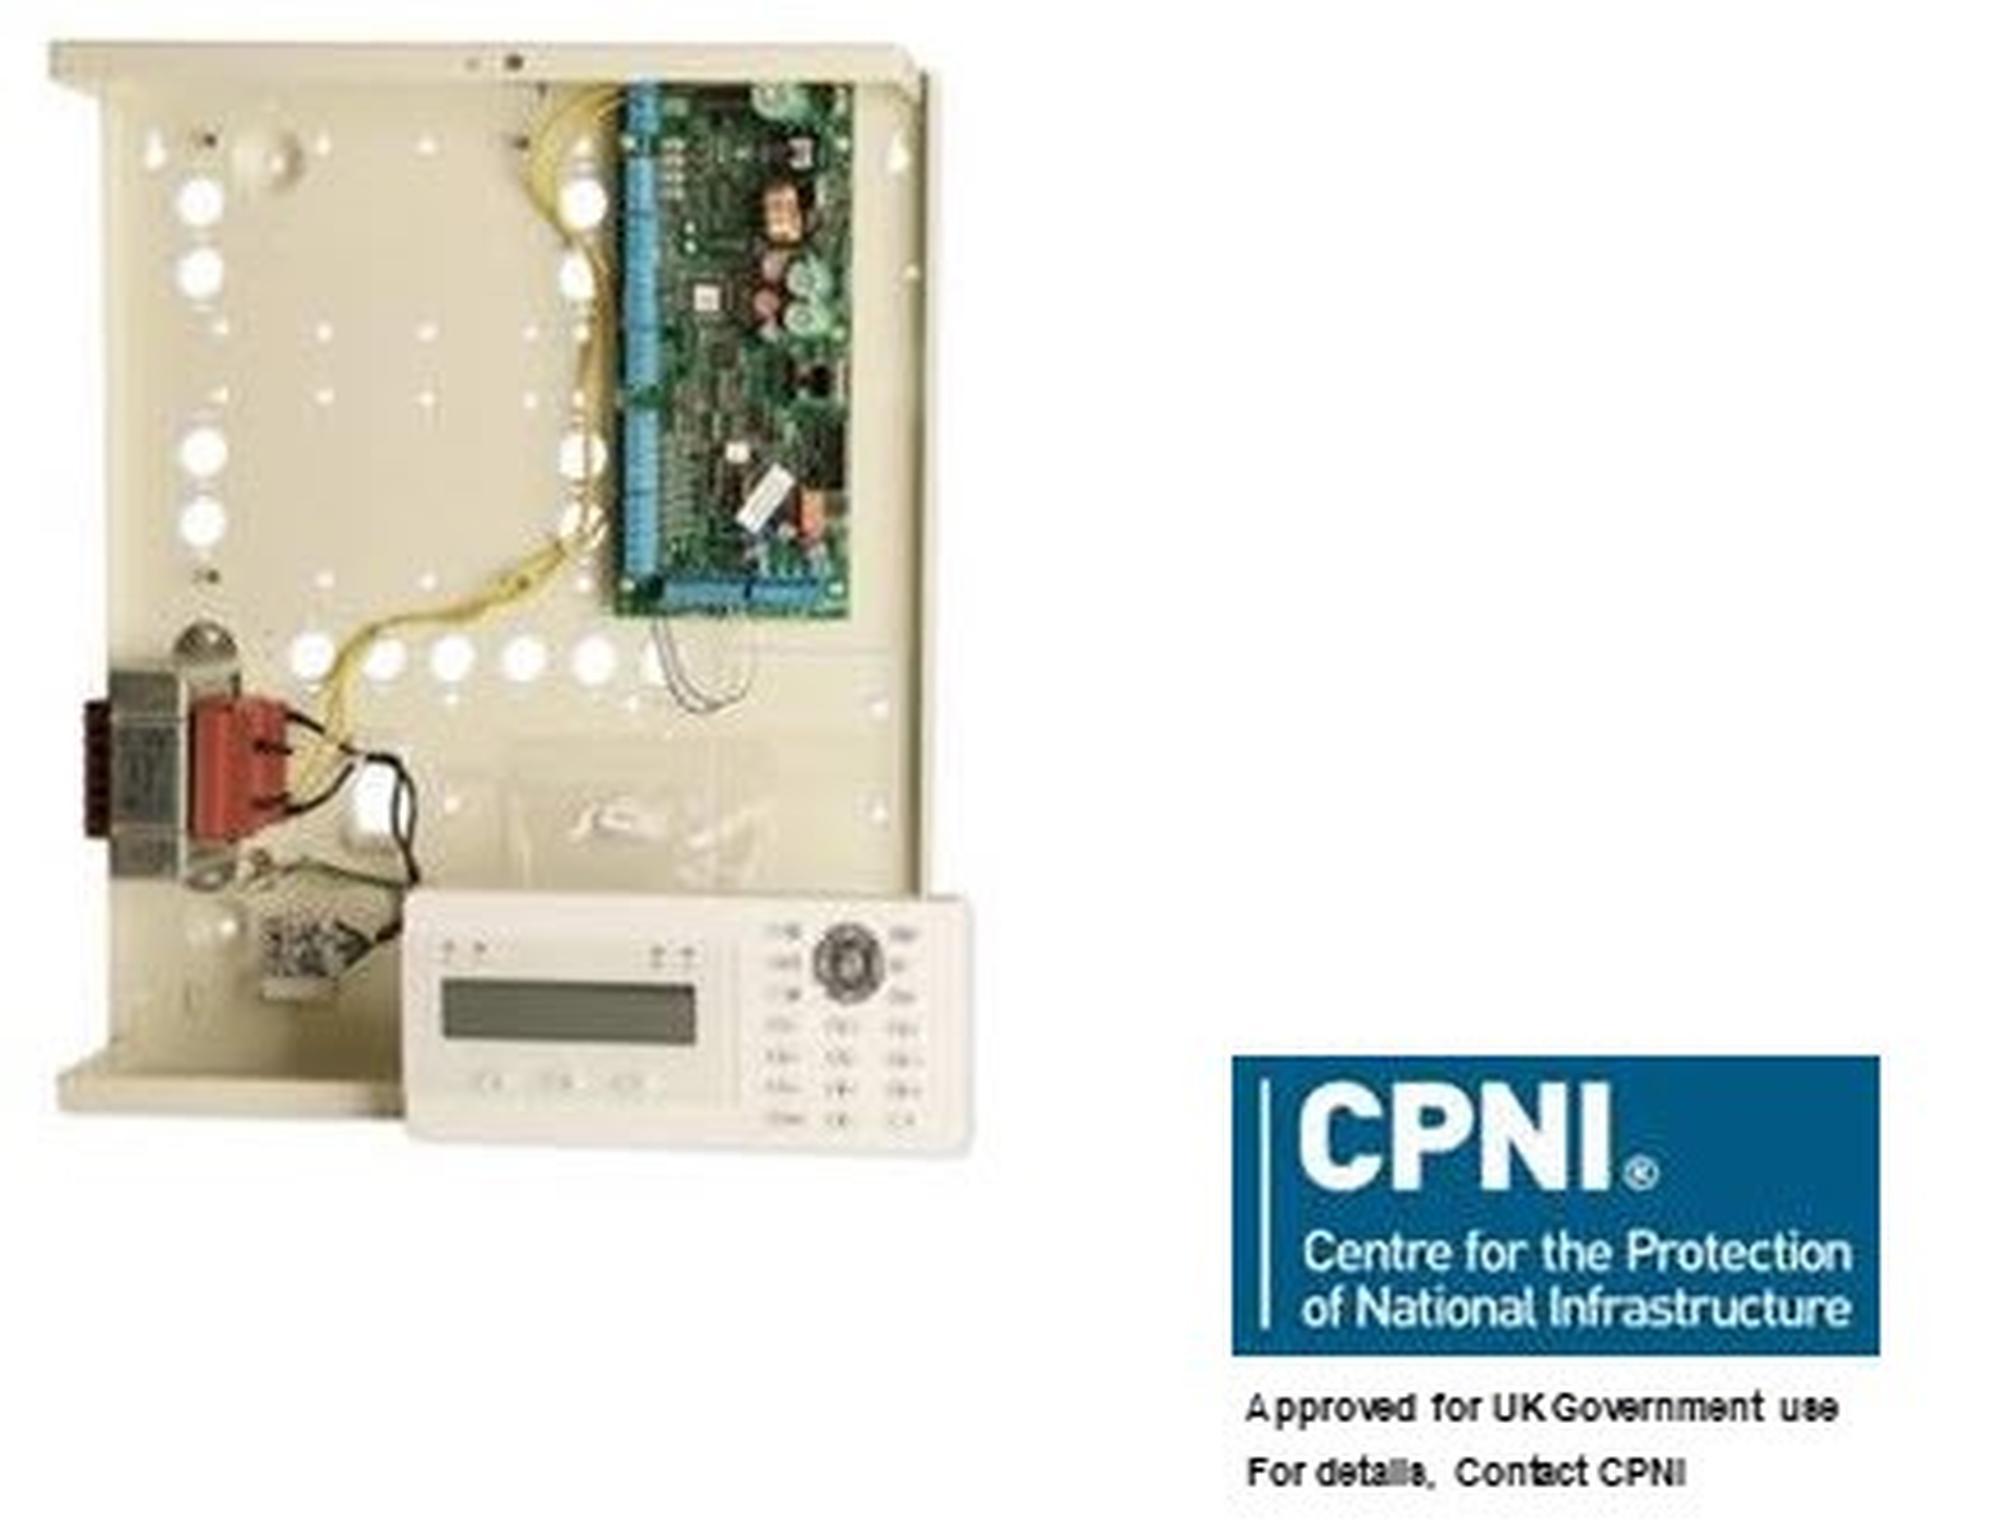 Carrier is pleased to announce that our Aritech Advisor Advanced control panels are now CPNI approved